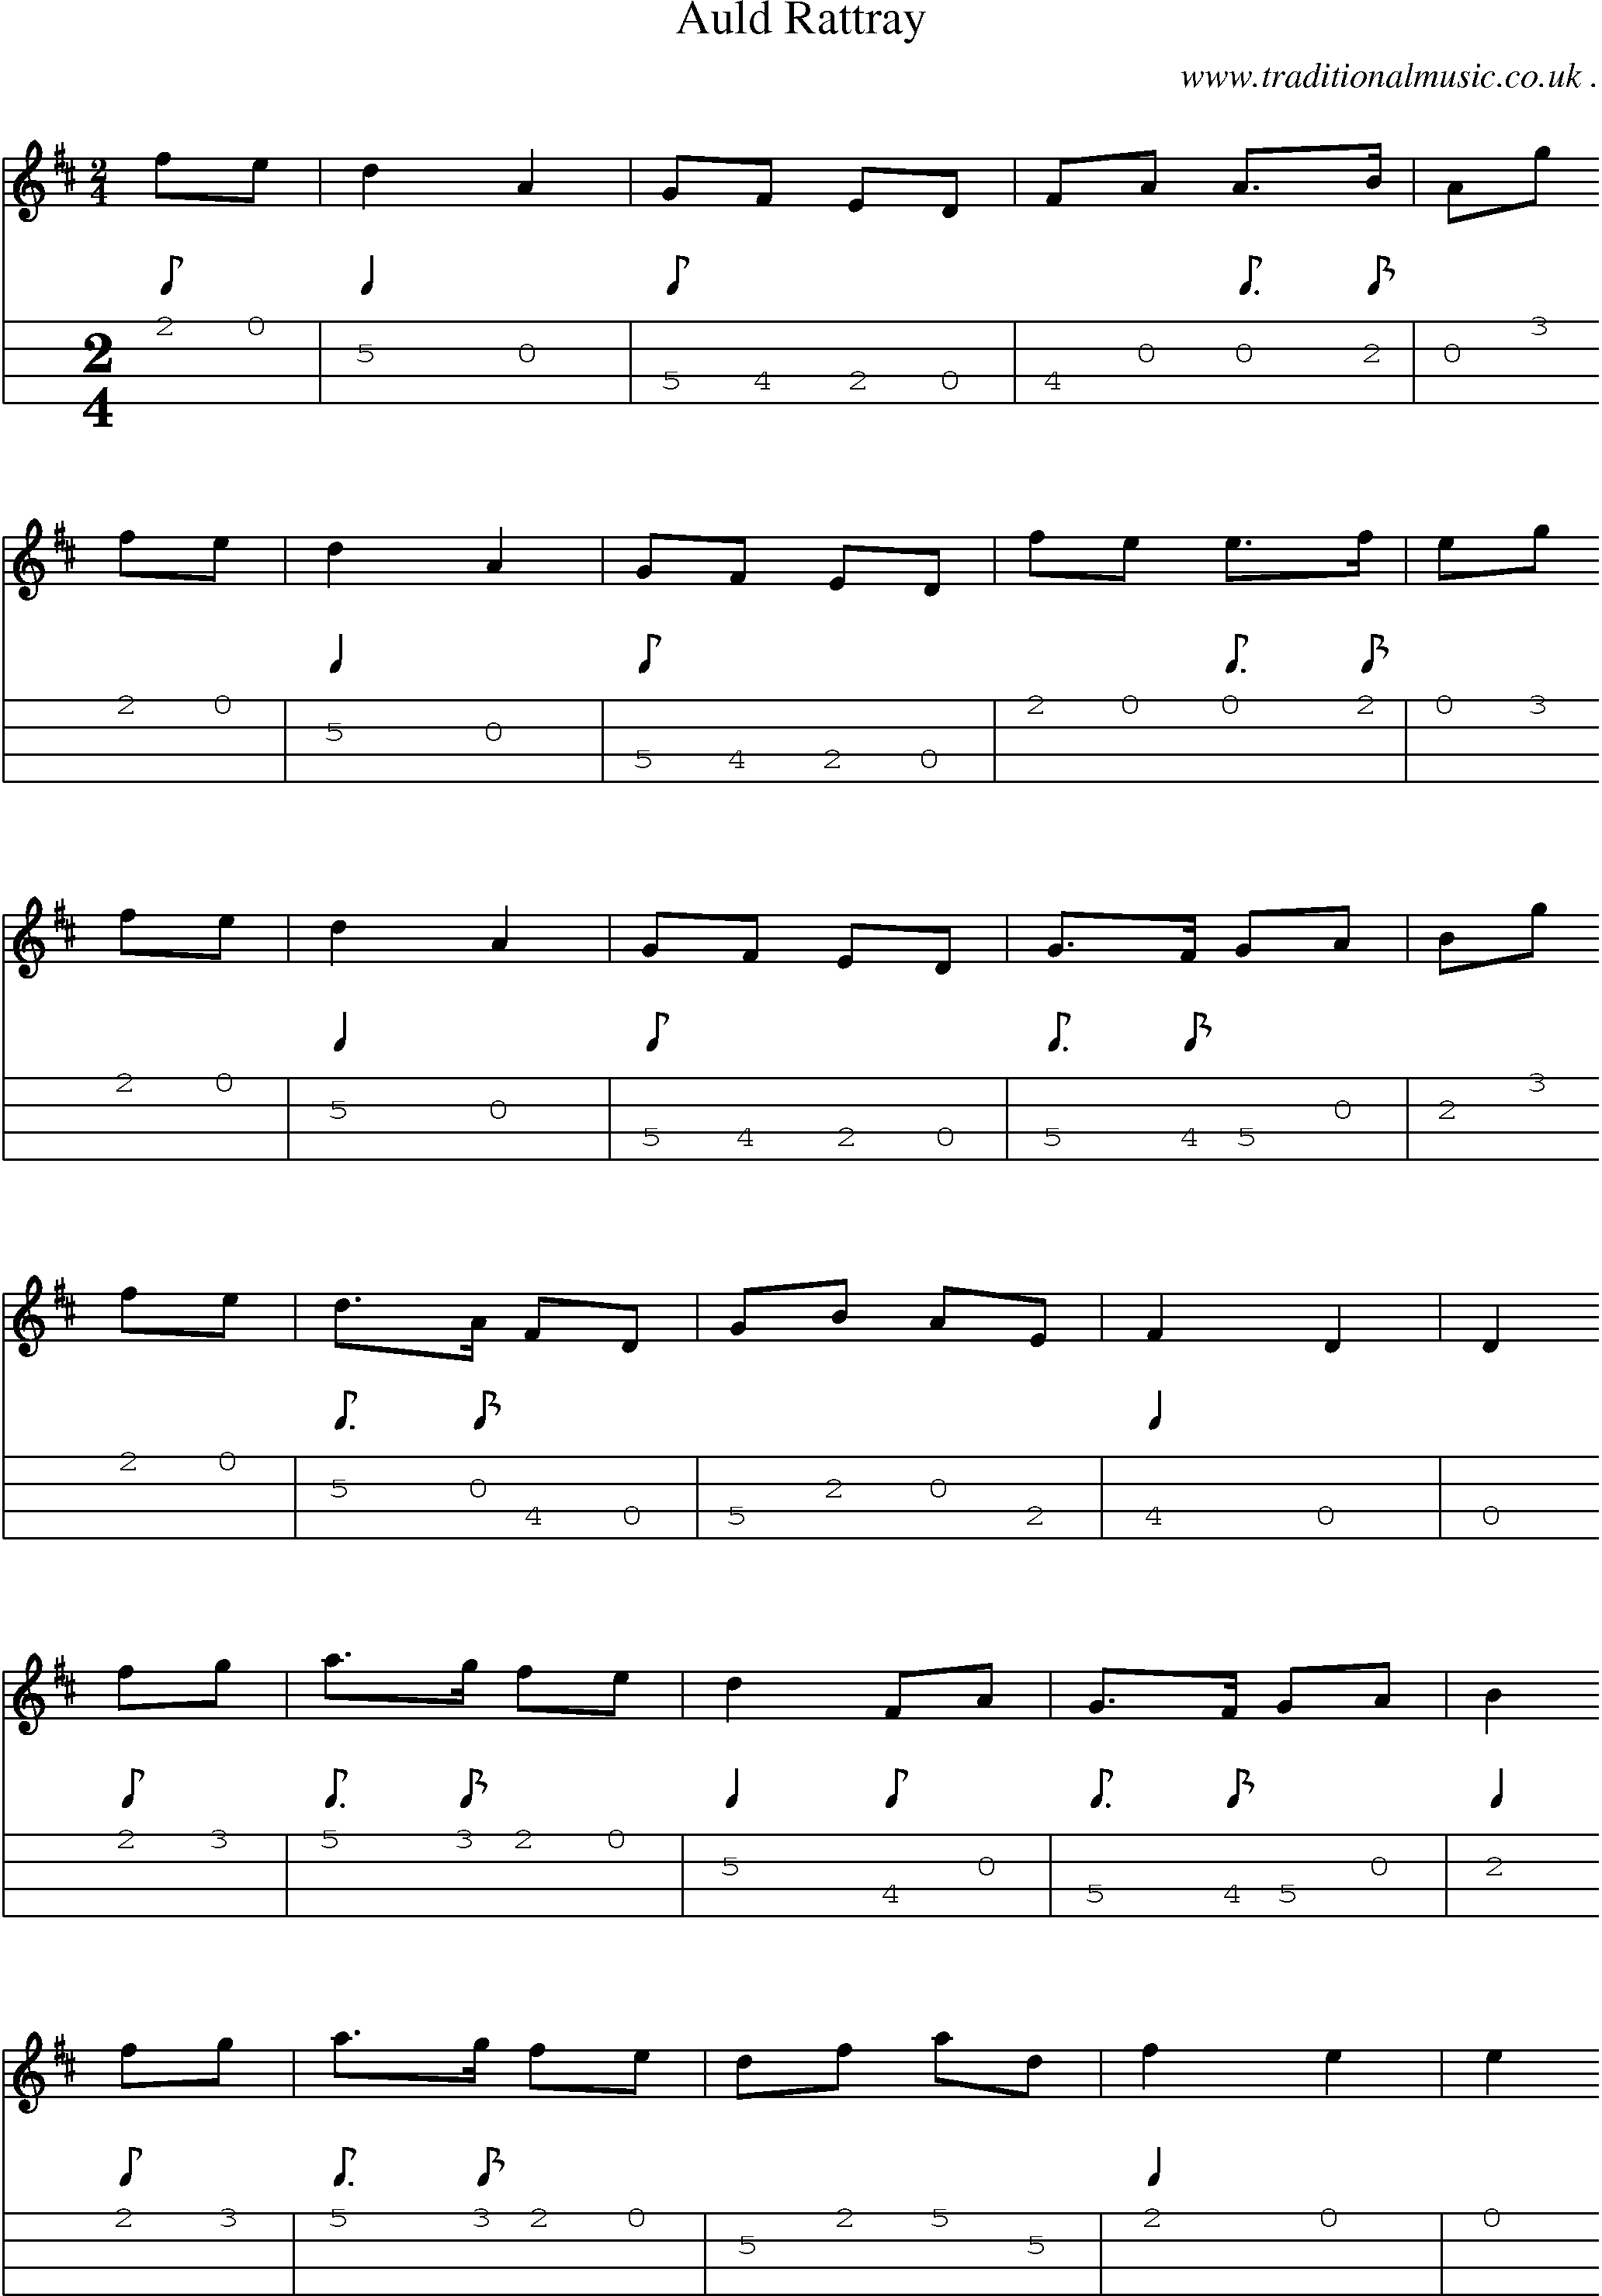 Sheet-music  score, Chords and Mandolin Tabs for Auld Rattray